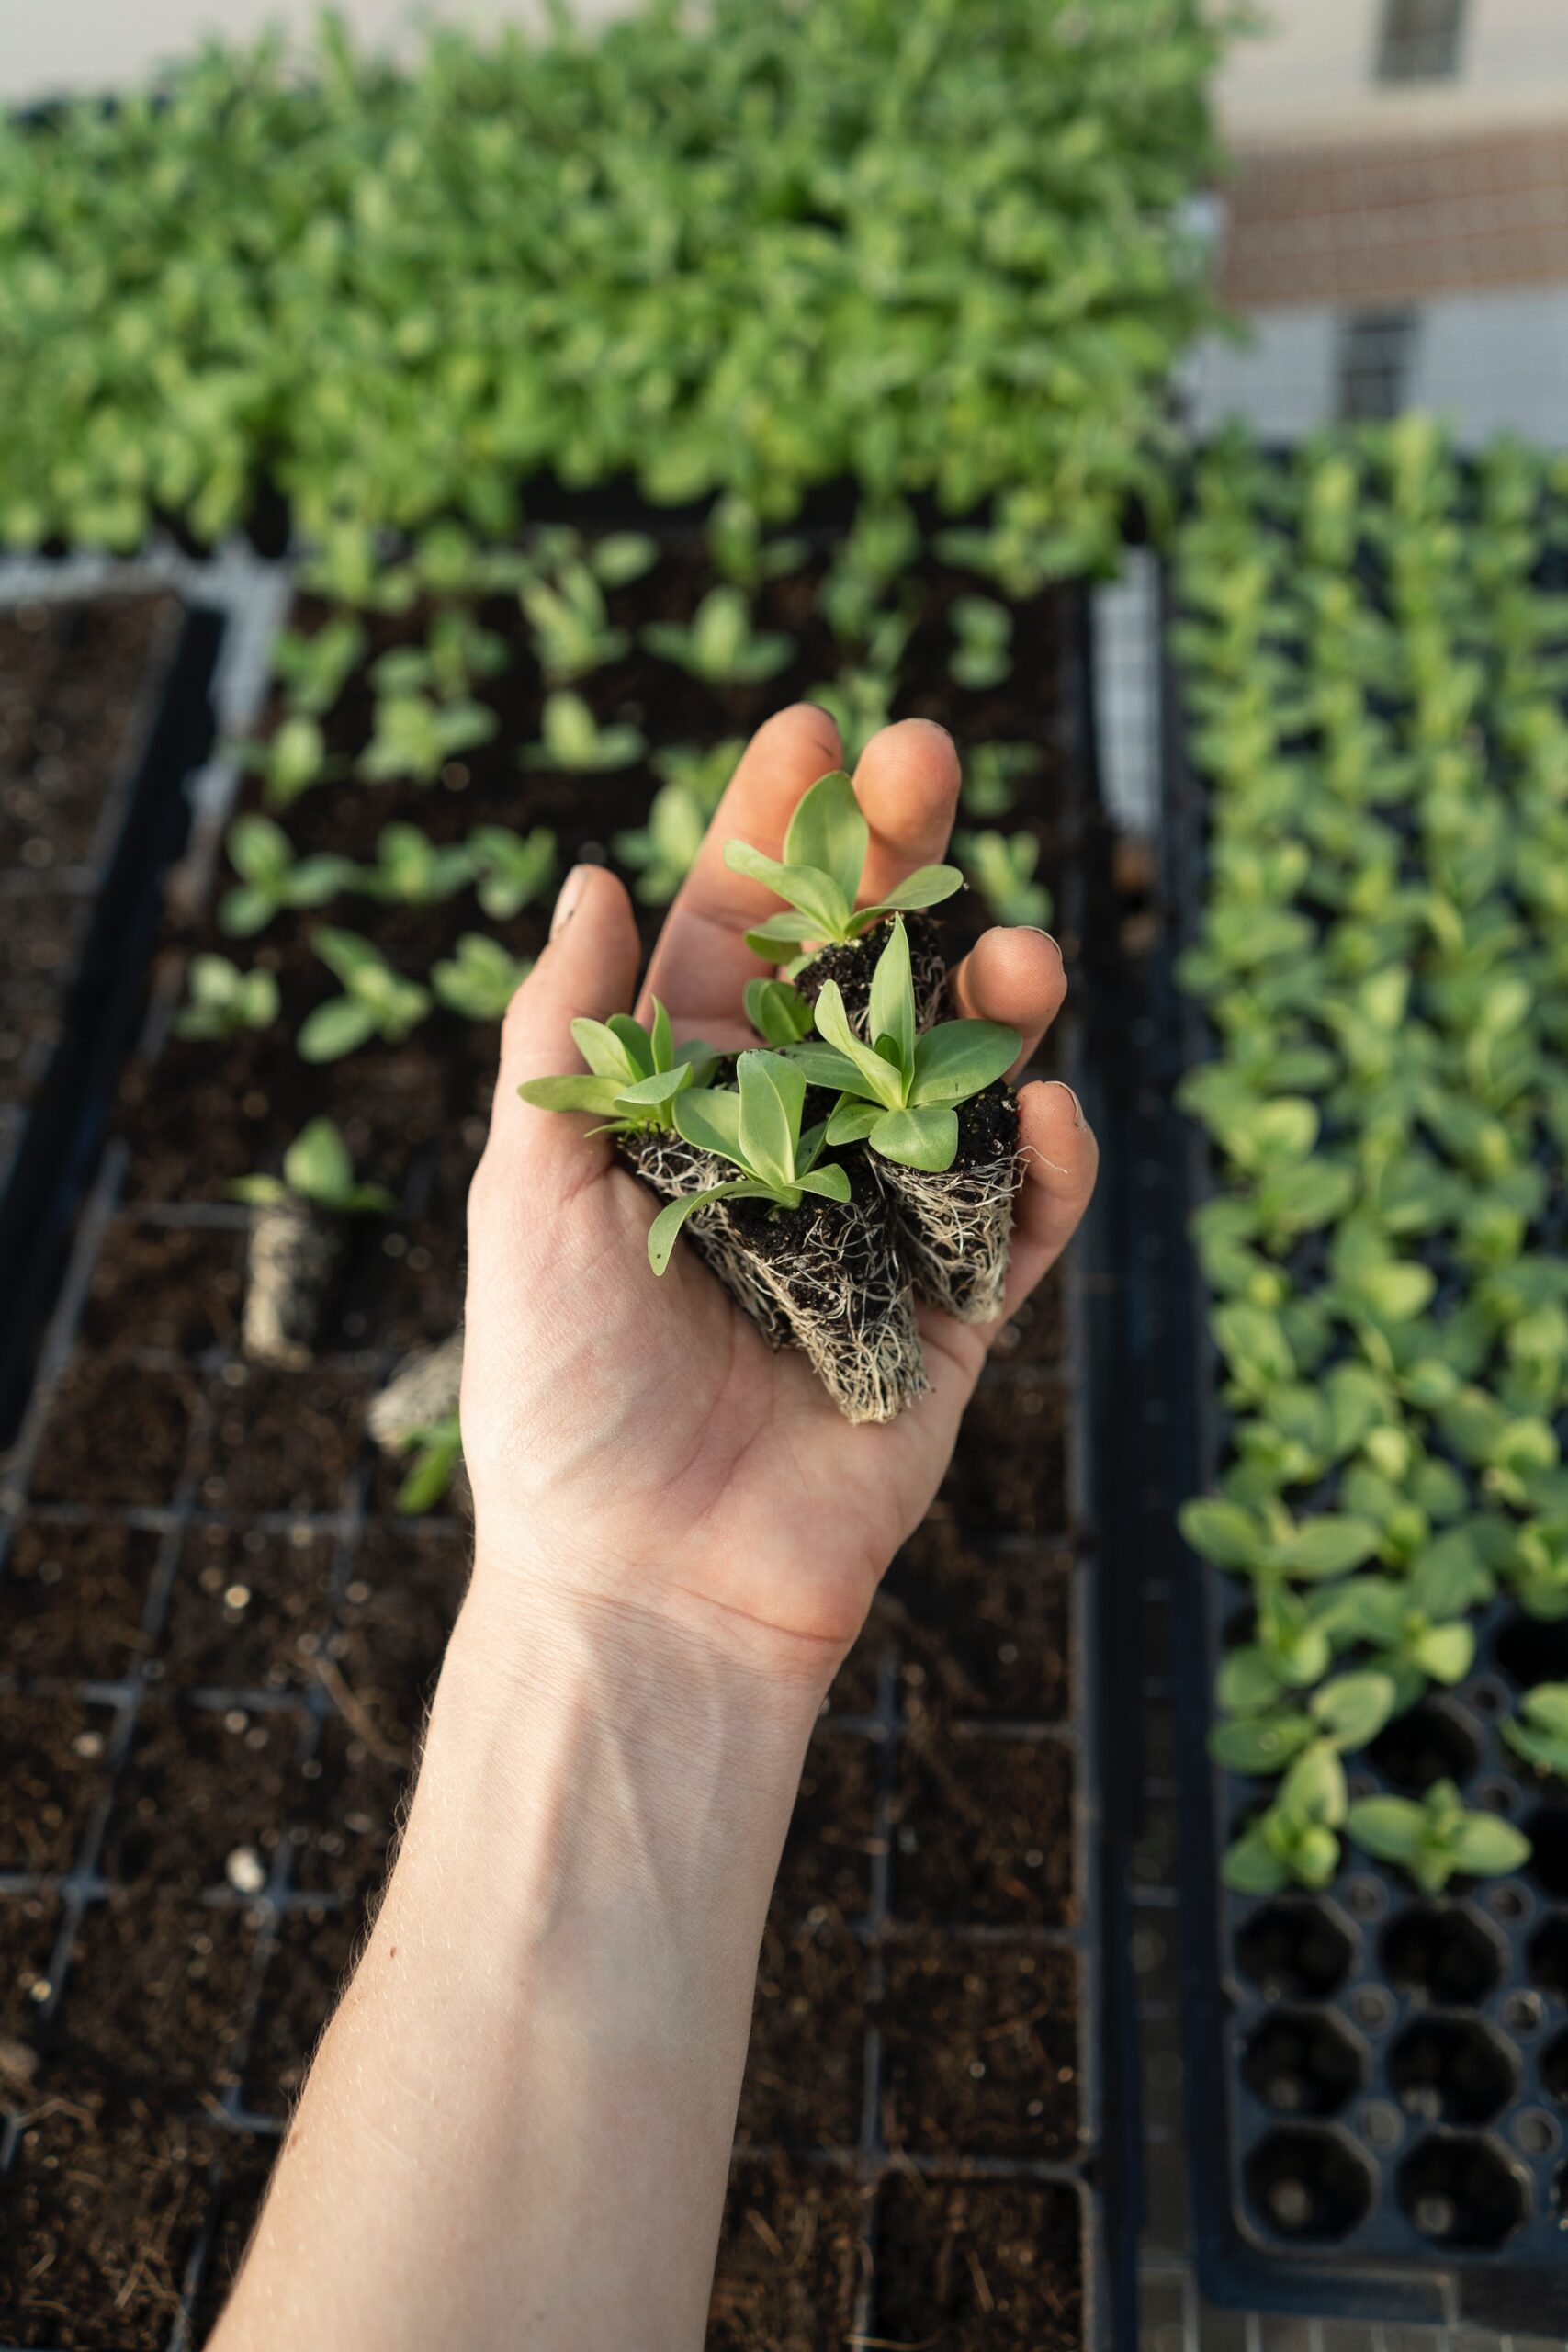 A hand nurturing a small seedling in a greenhouse filled with loam soil.